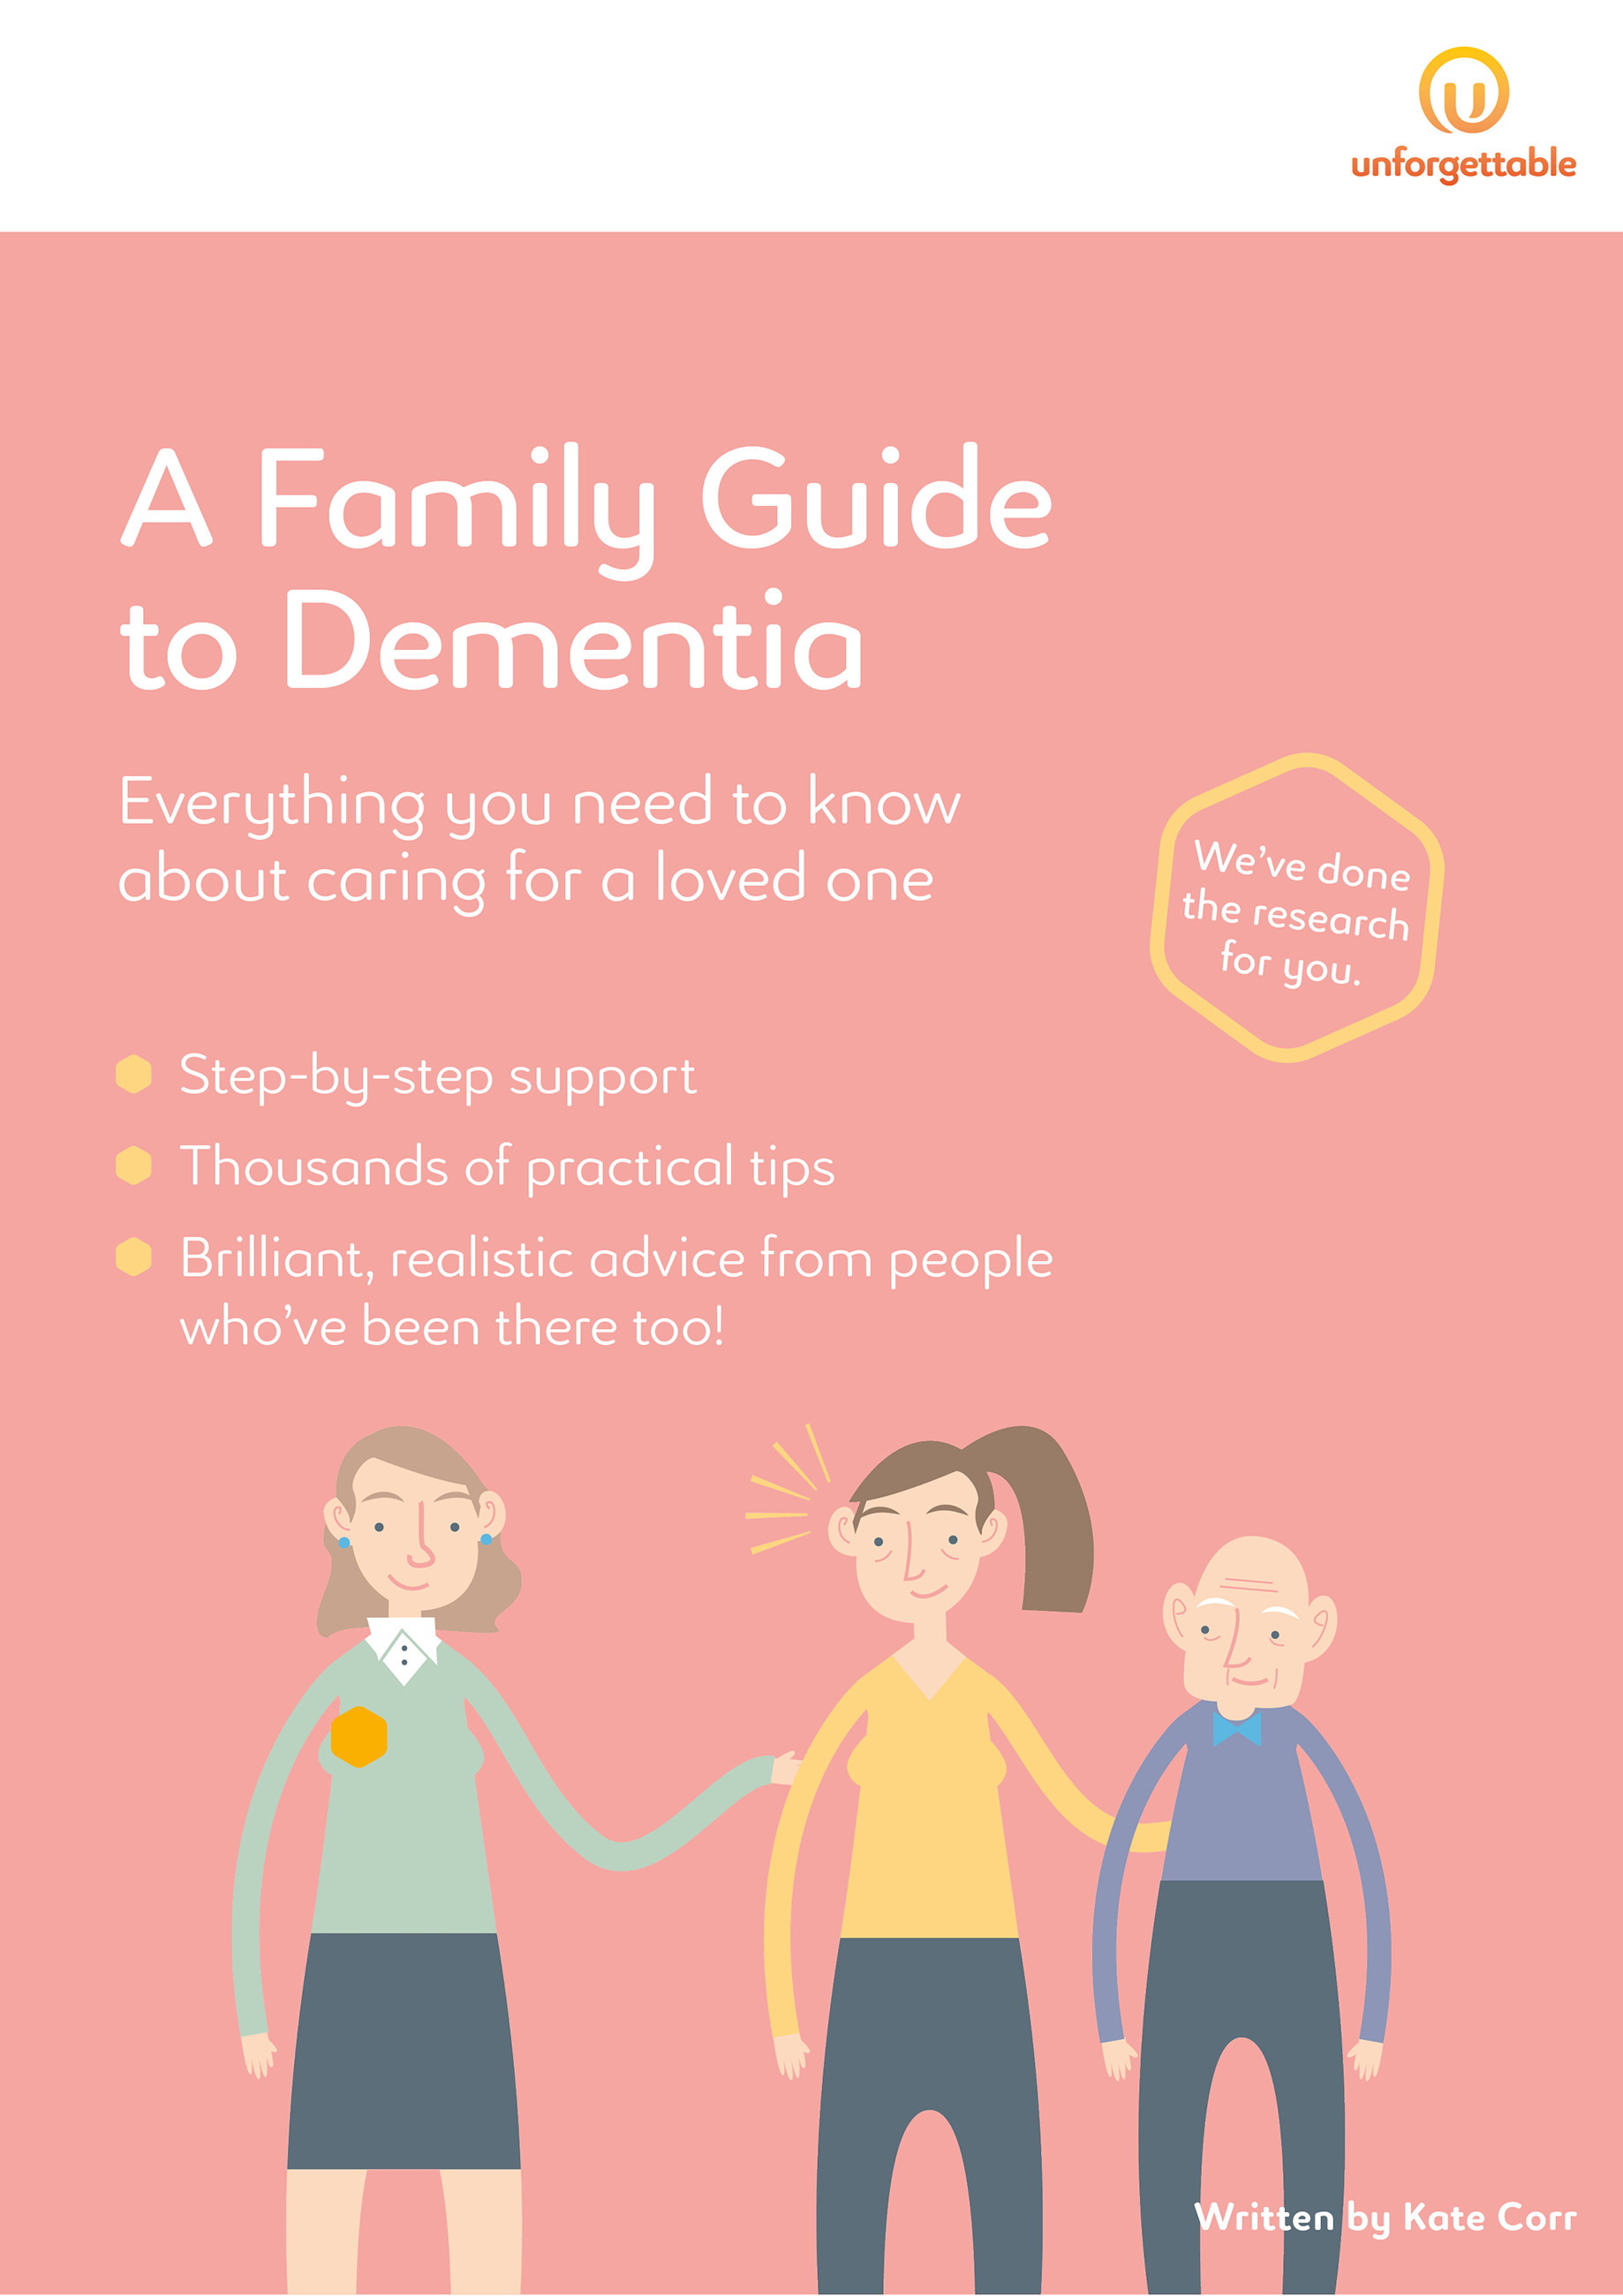 A Family Guide to Dementia